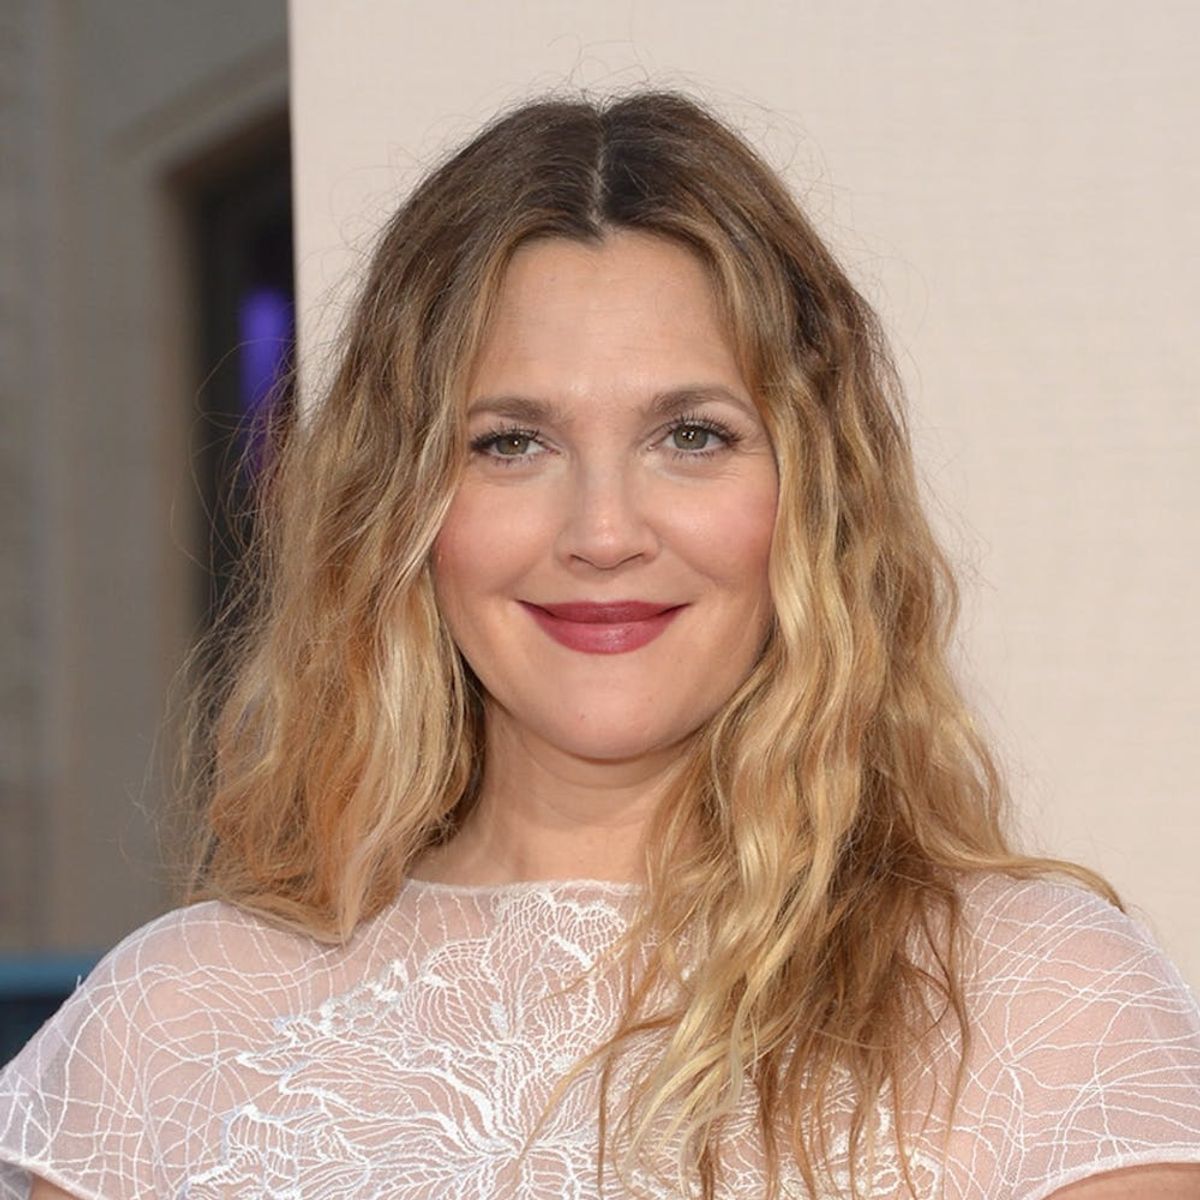 Check Out the Top 5 Home Decor Stores Drew Barrymore Can’t Live Without